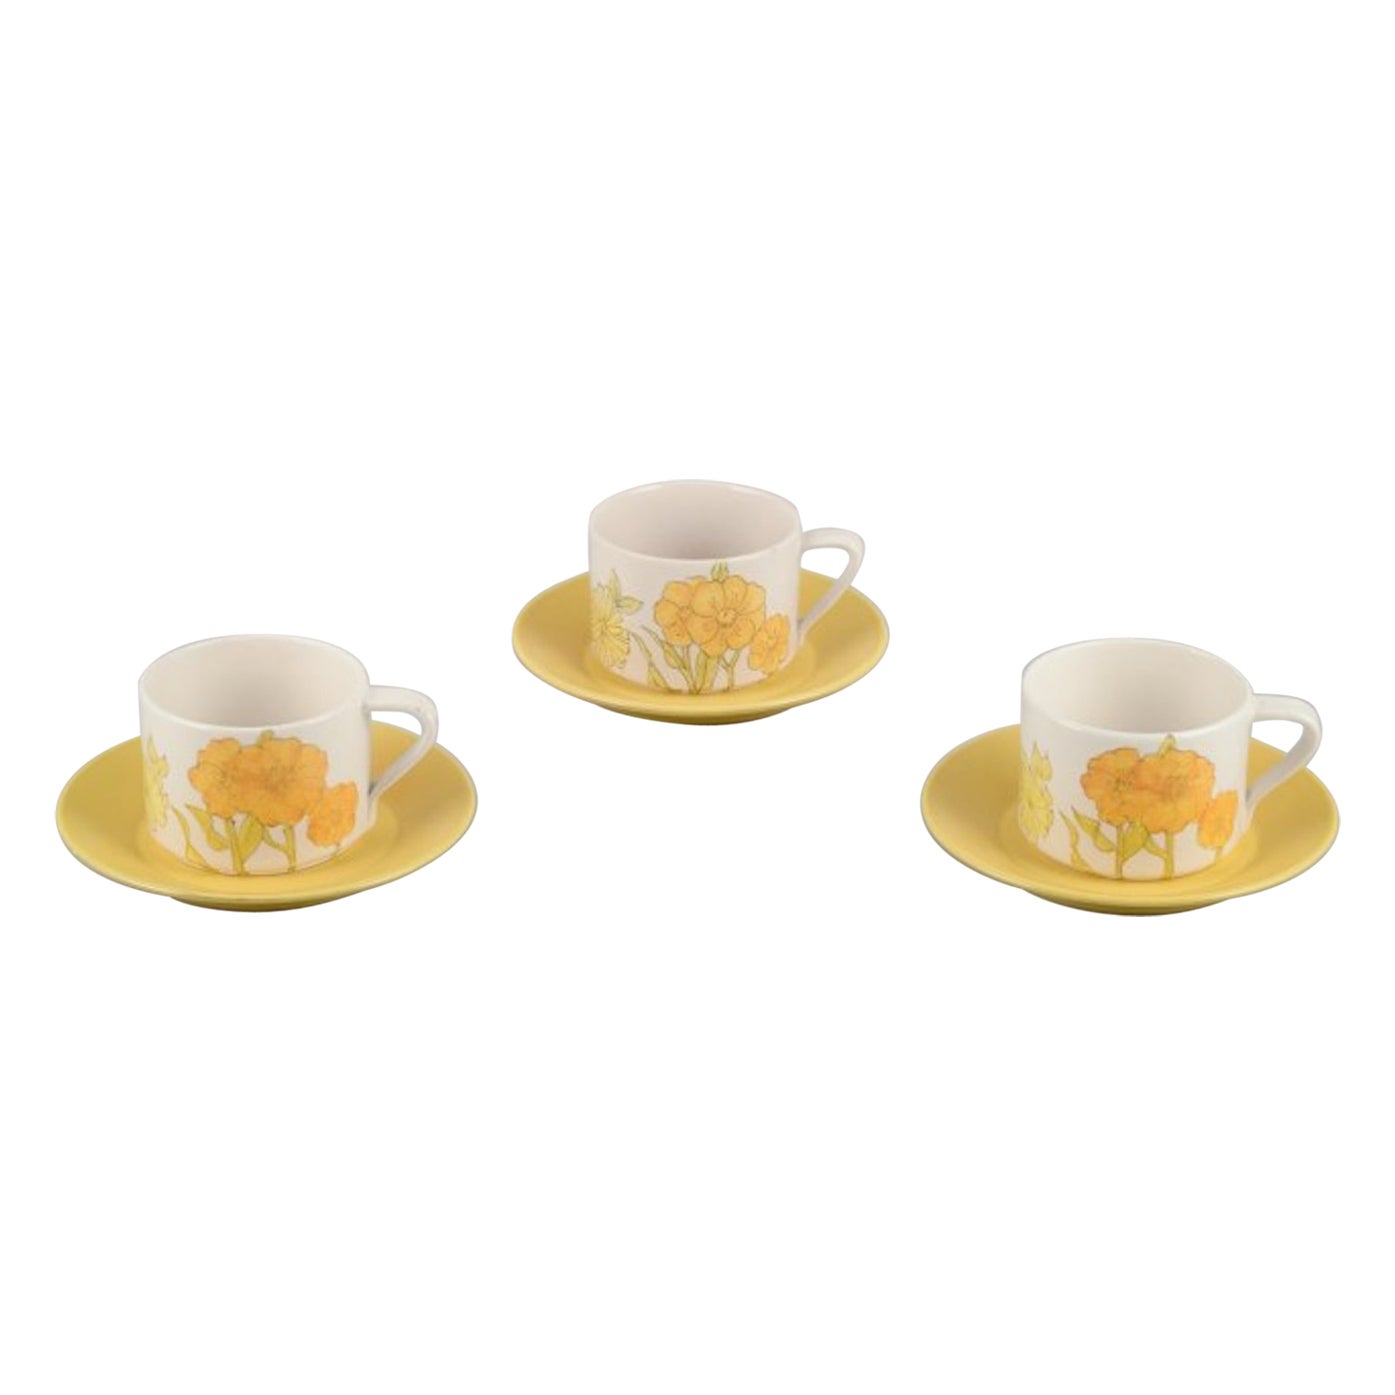 Ernestine Salerno, Italy. Three large coffee cups/morning cups with saucers.